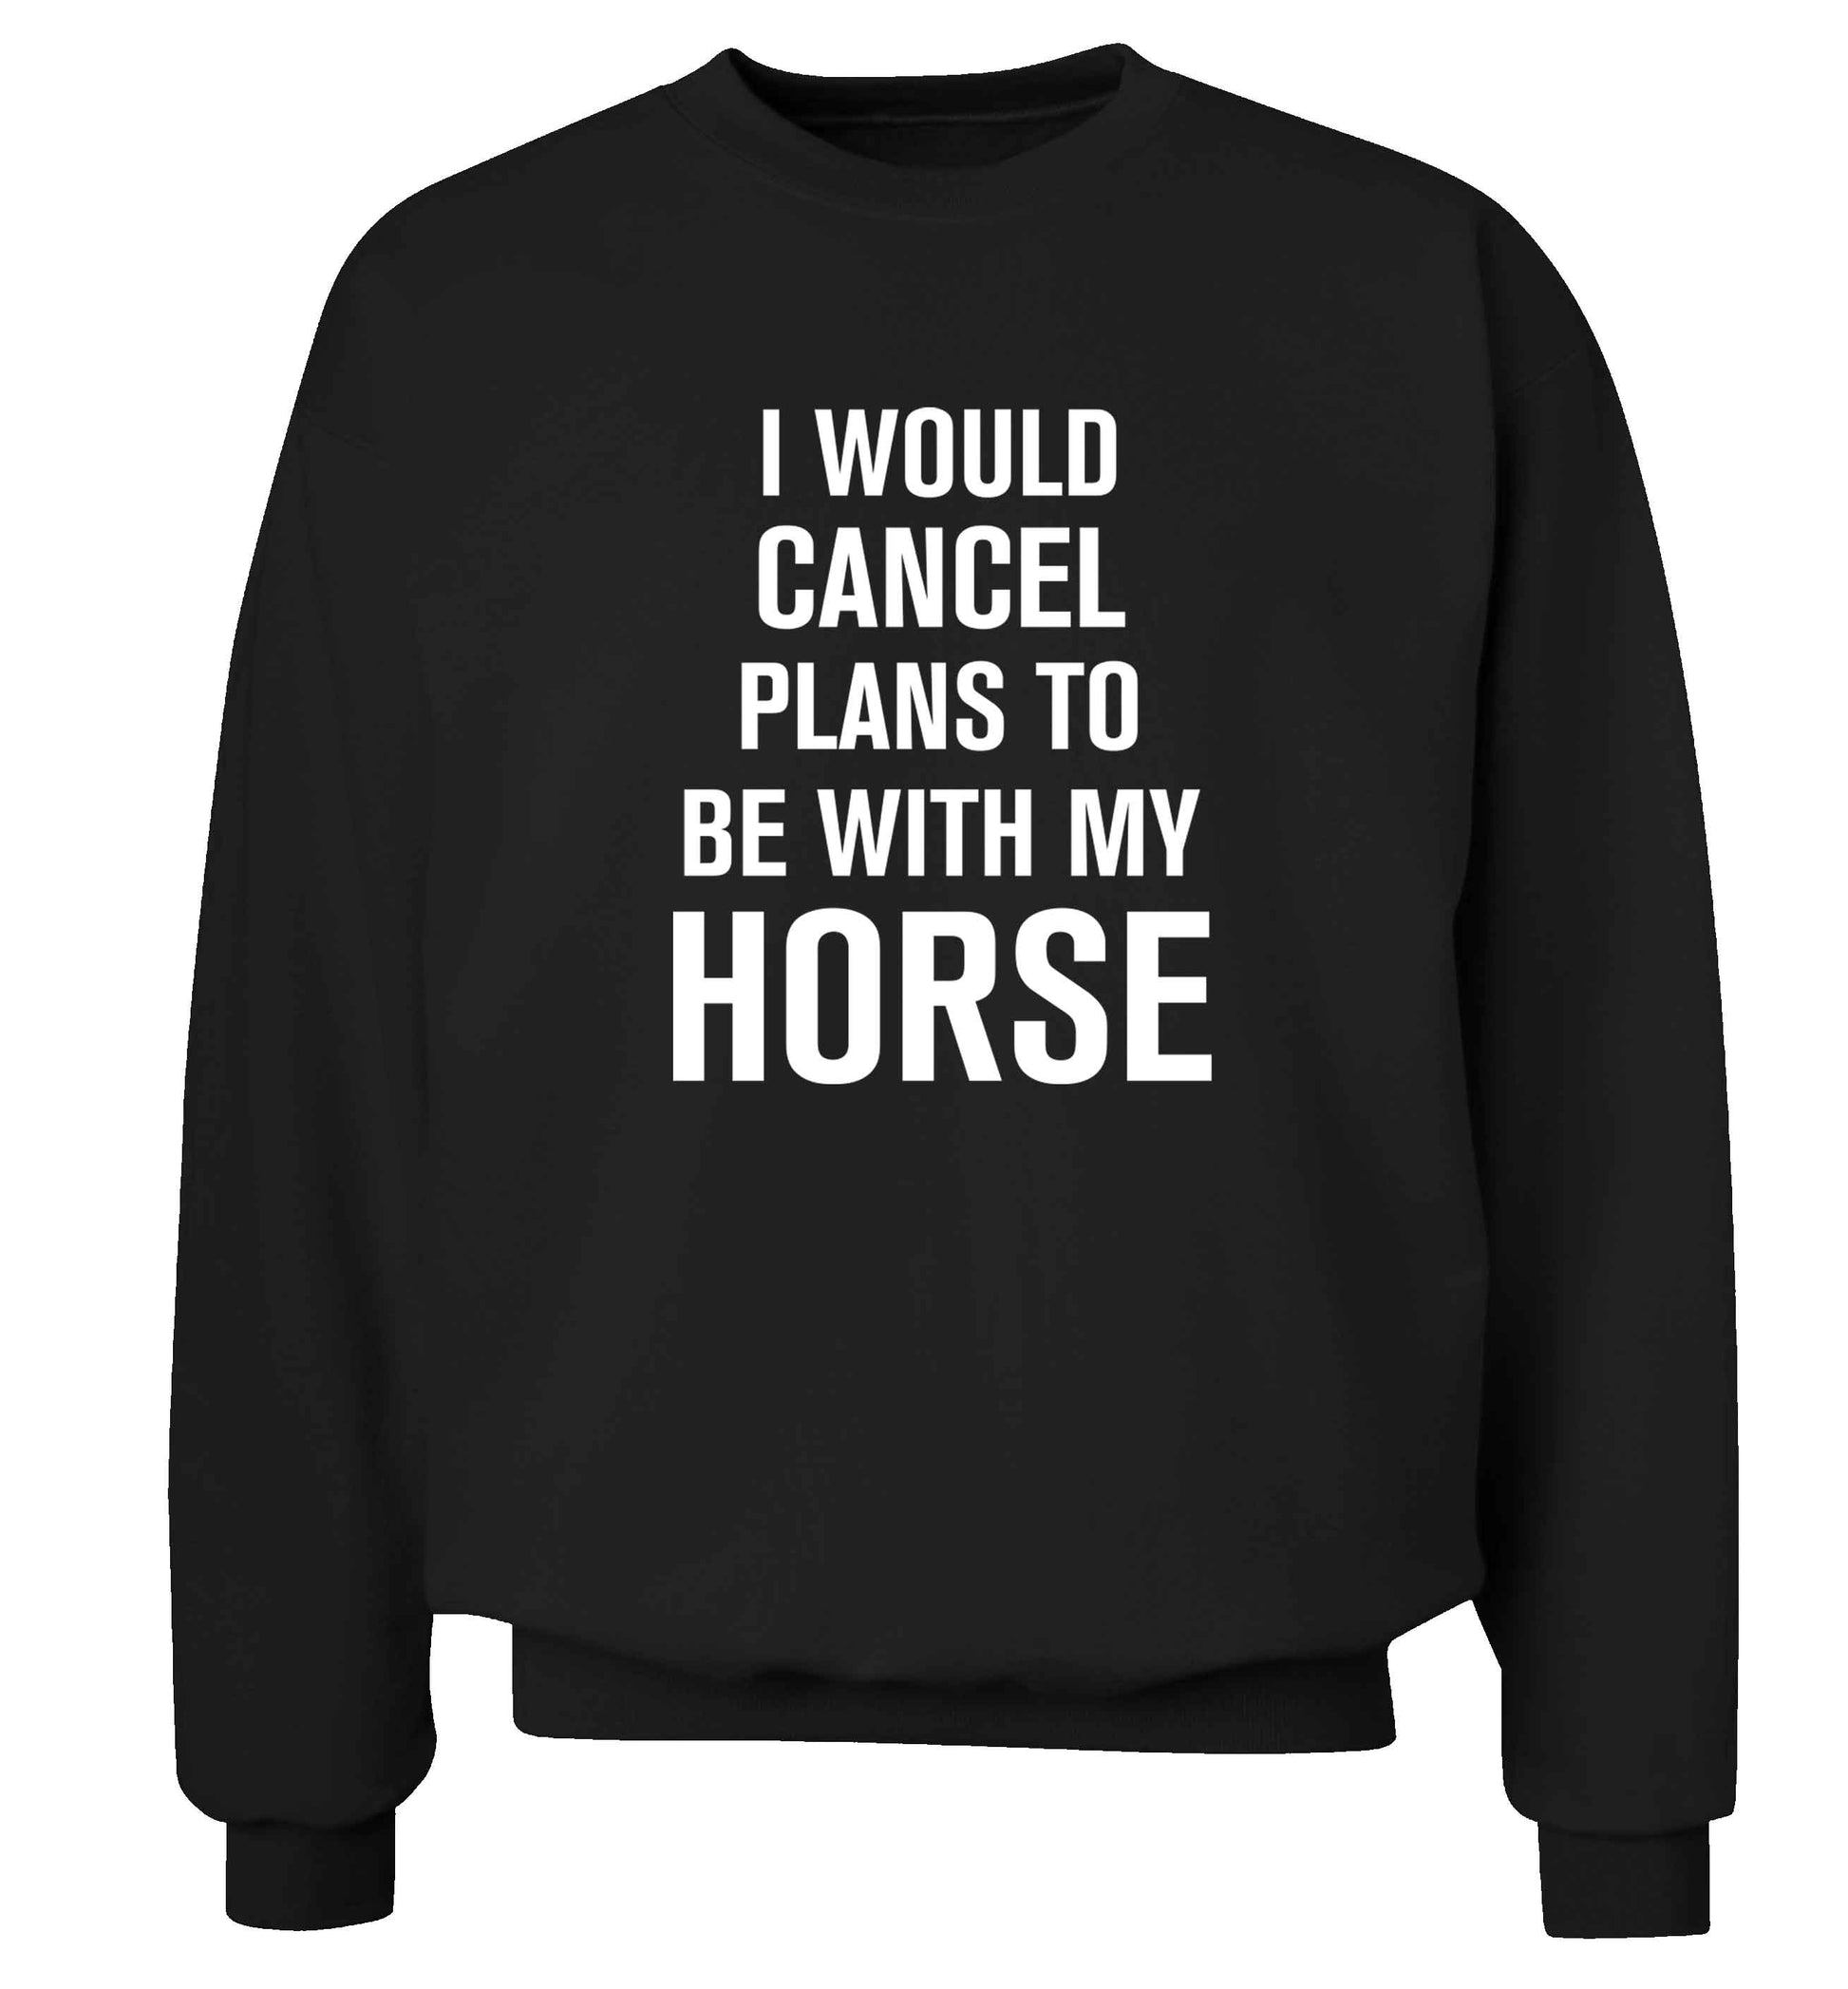 I will cancel plans to be with my horse adult's unisex black sweater 2XL